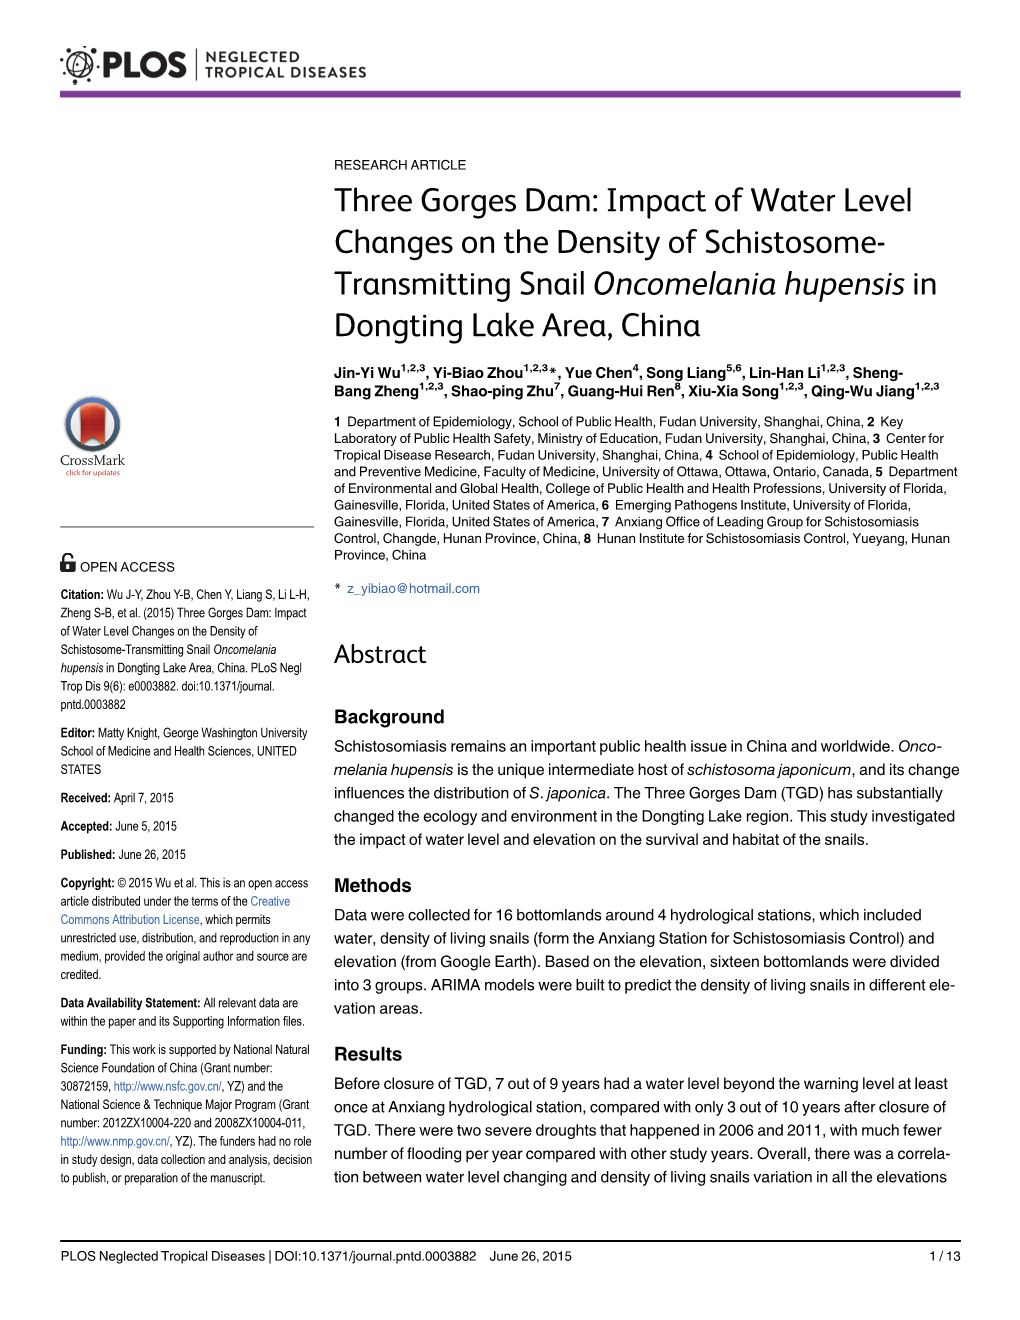 Three Gorges Dam: Impact of Water Level Changes on the Density of Schistosome- Transmitting Snail Oncomelania Hupensis in Dongting Lake Area, China